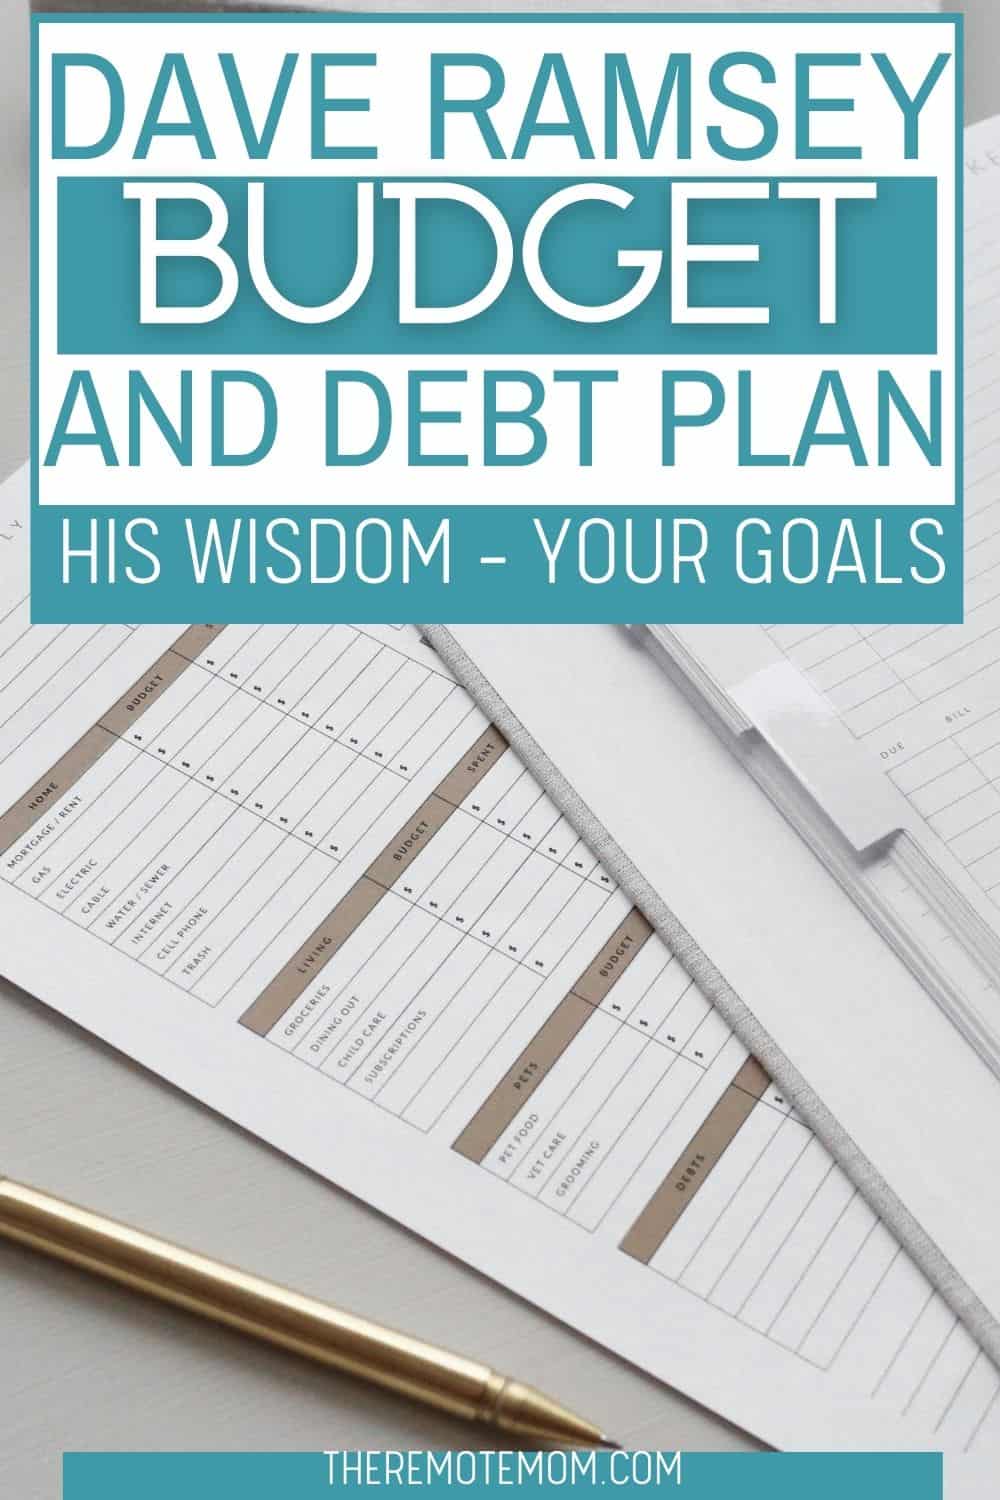 DAVE RAMSEY BABY STEPS DAVE RAMSEY BUDGET PERCENTAGES